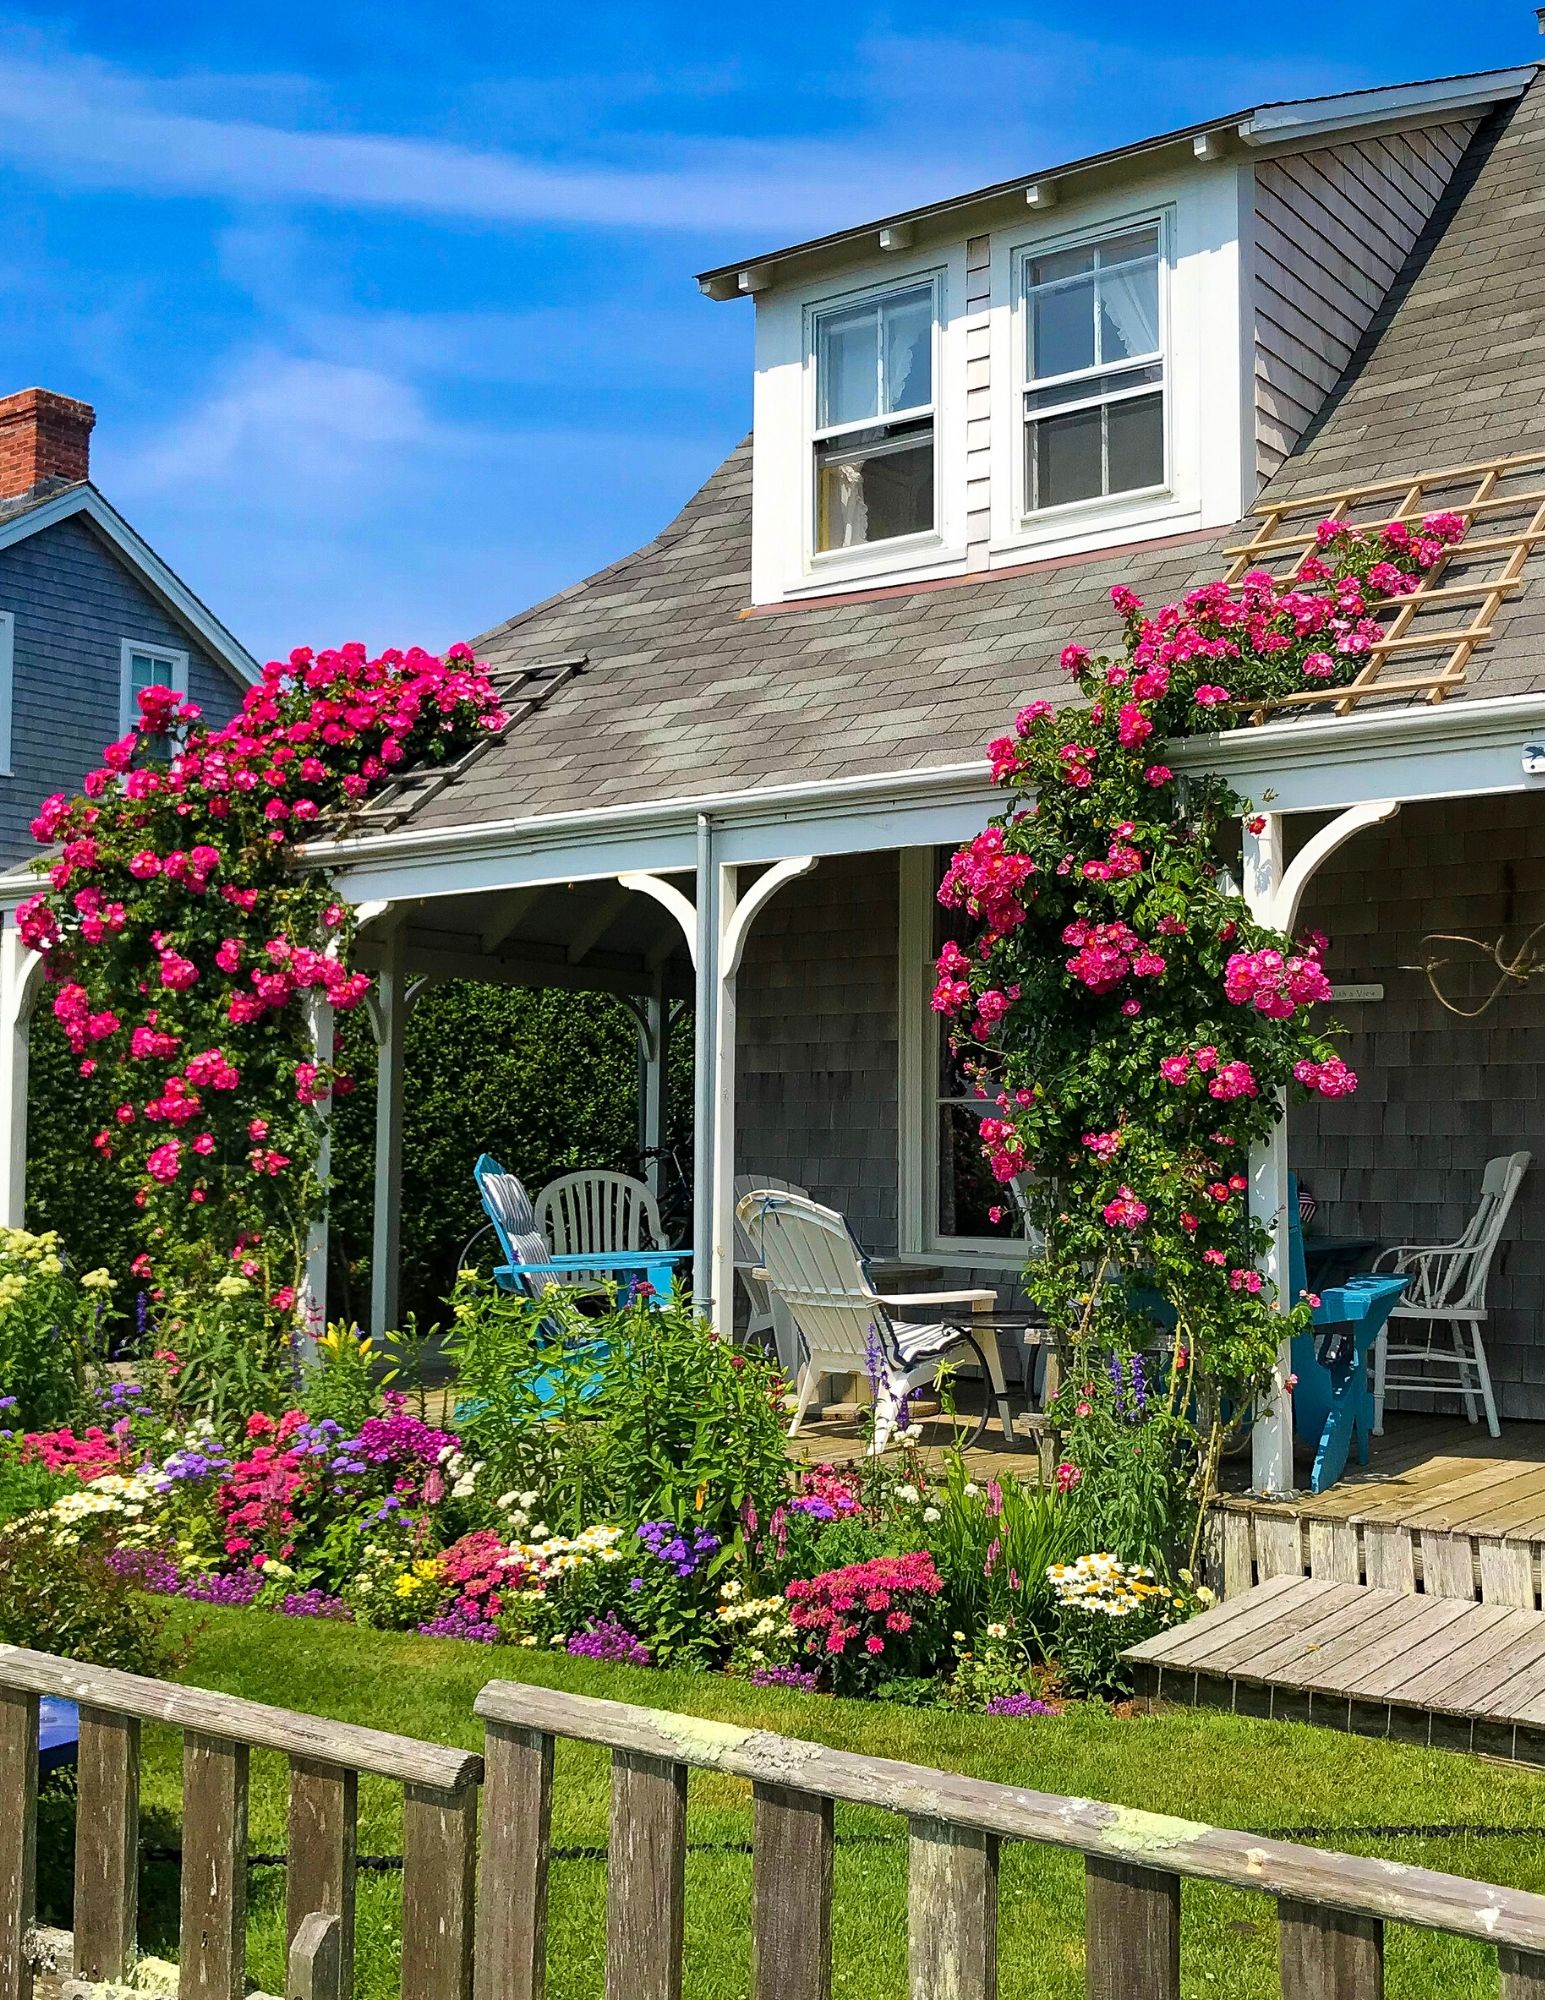 Nantucket Rose Covered Cottages in Sconset-2